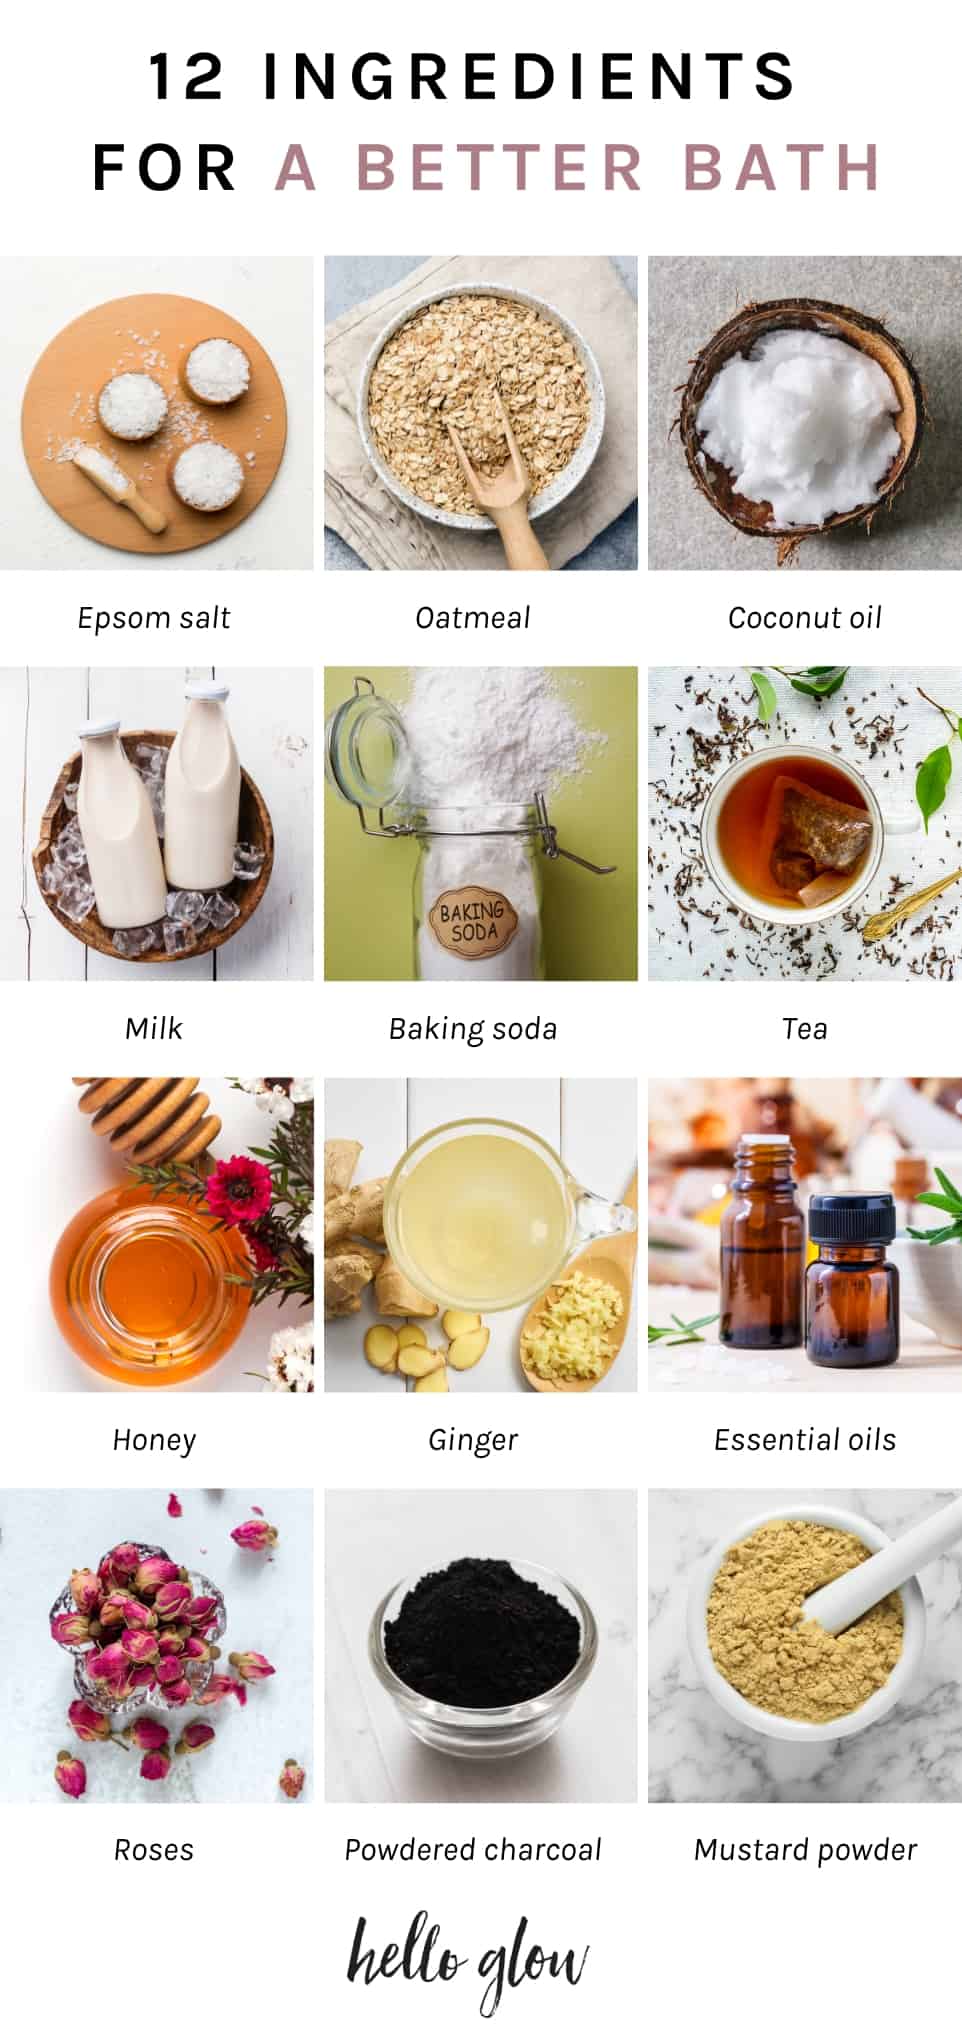 12 Ingredients for a Better Bath